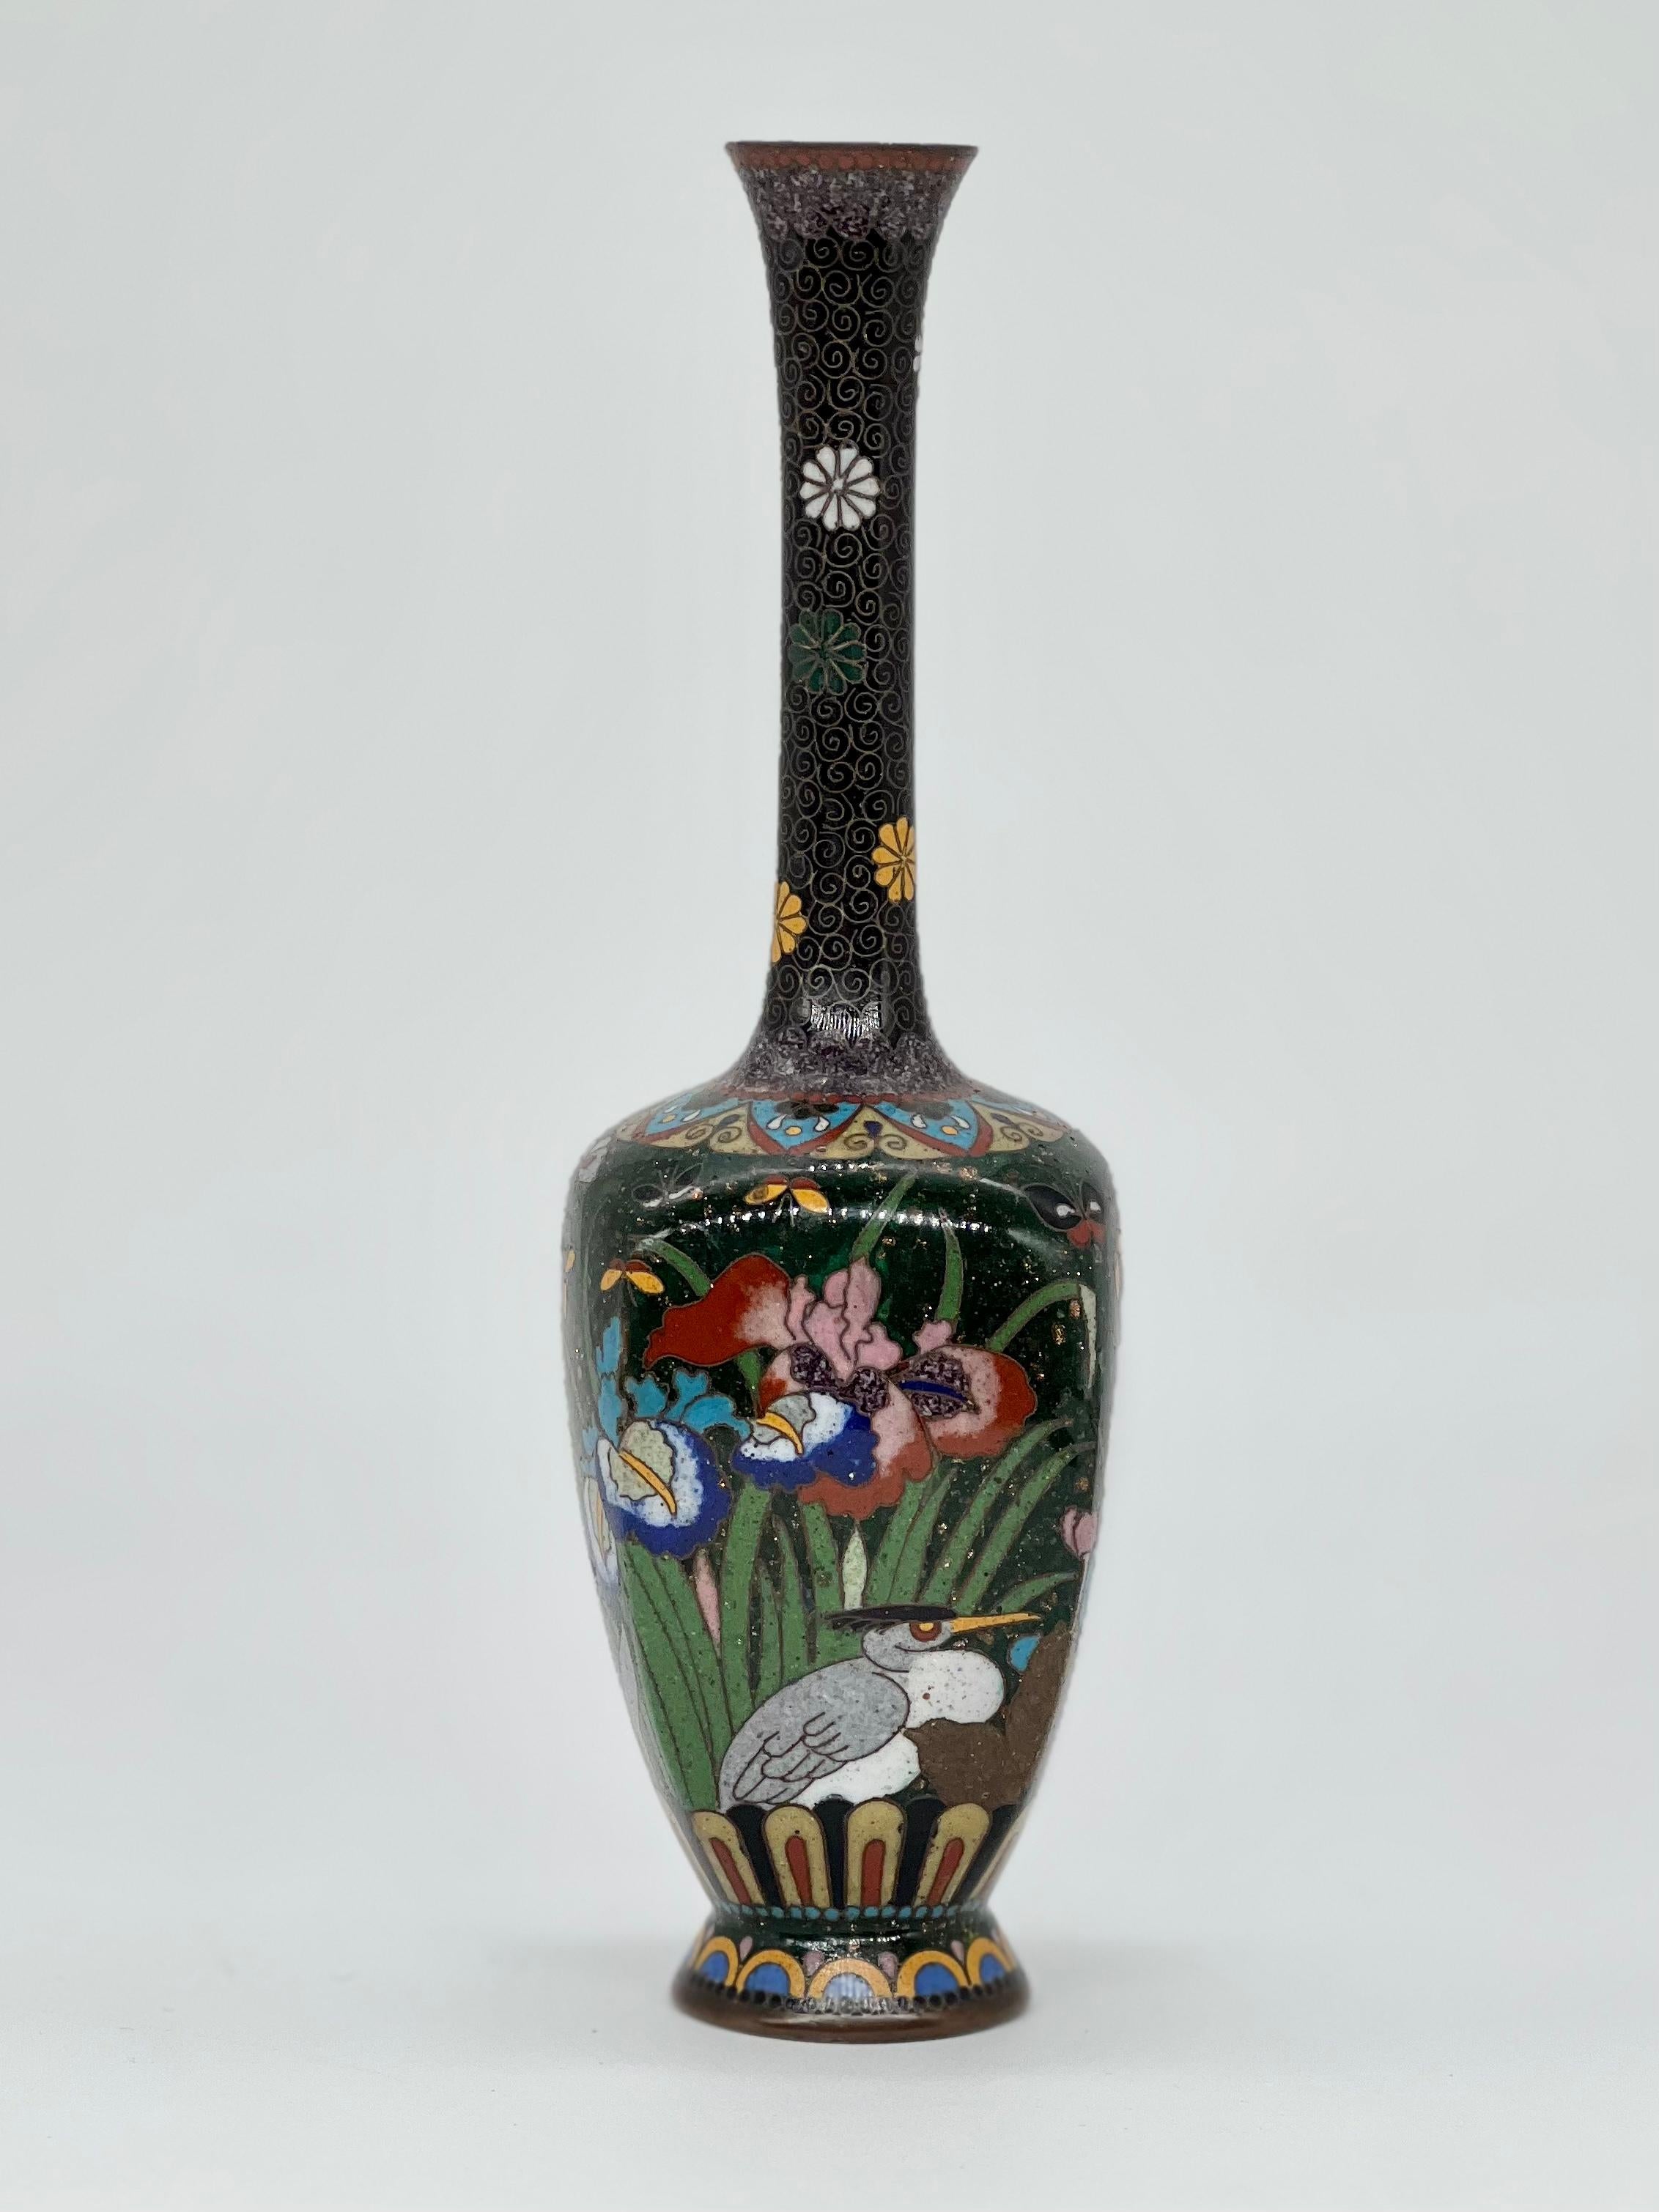 A fine Japanese Kyoto Shippo Cloisonne enamel vase 19th C 
Meiji Period 

JAPANESE CLOISONNE ENAMEL VASE,?decorated with cranes and butterflies amongst lotus and iris blooms reserved on a gold flecked green ground. 

In good condition.

Size: